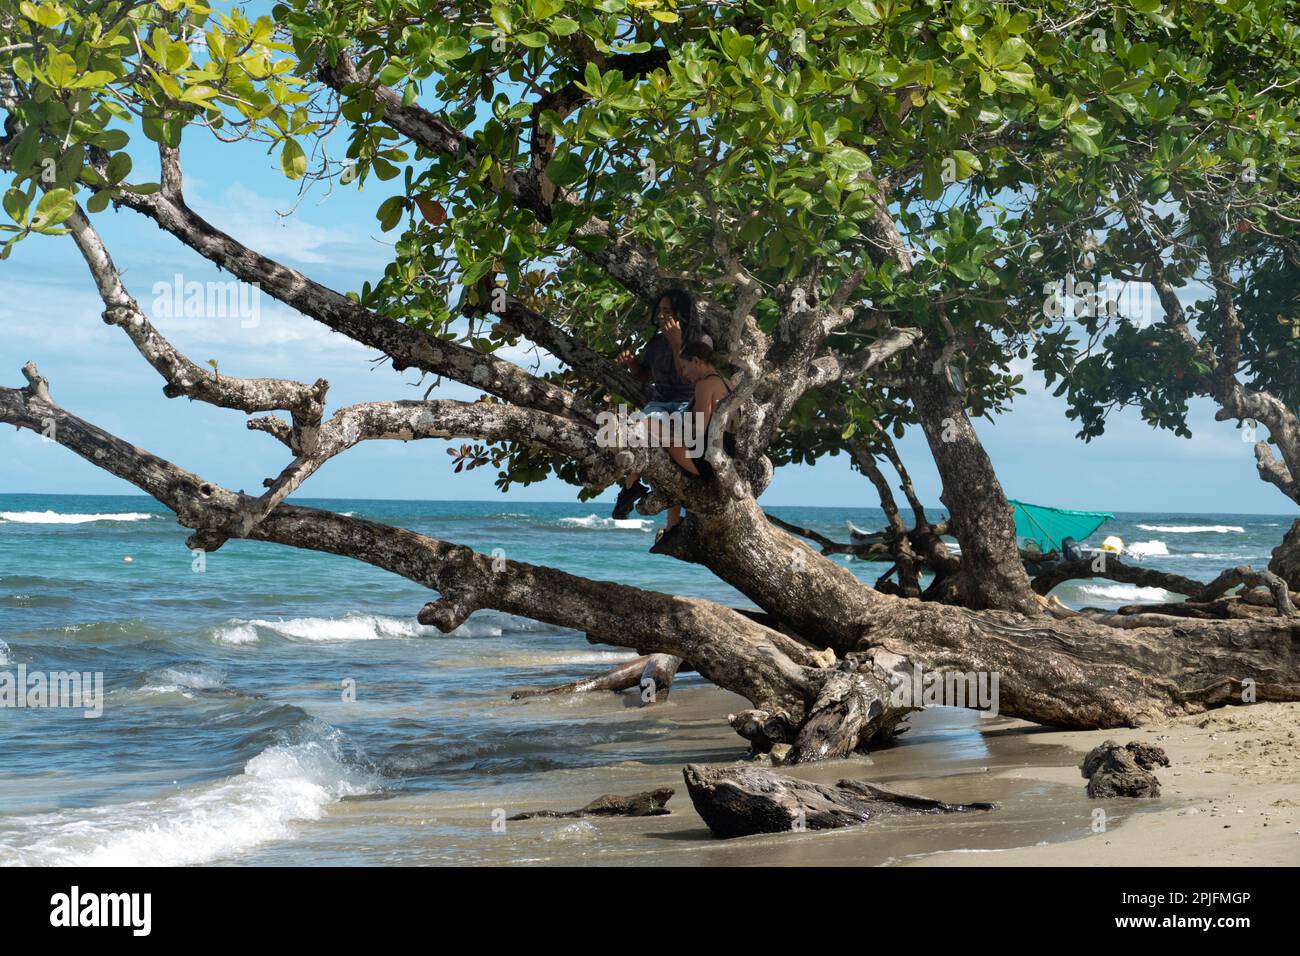 scenic  beach of Cocles on the Caribbean side of Costa Rica, Puerto Viejo de Talamanca Stock Photo